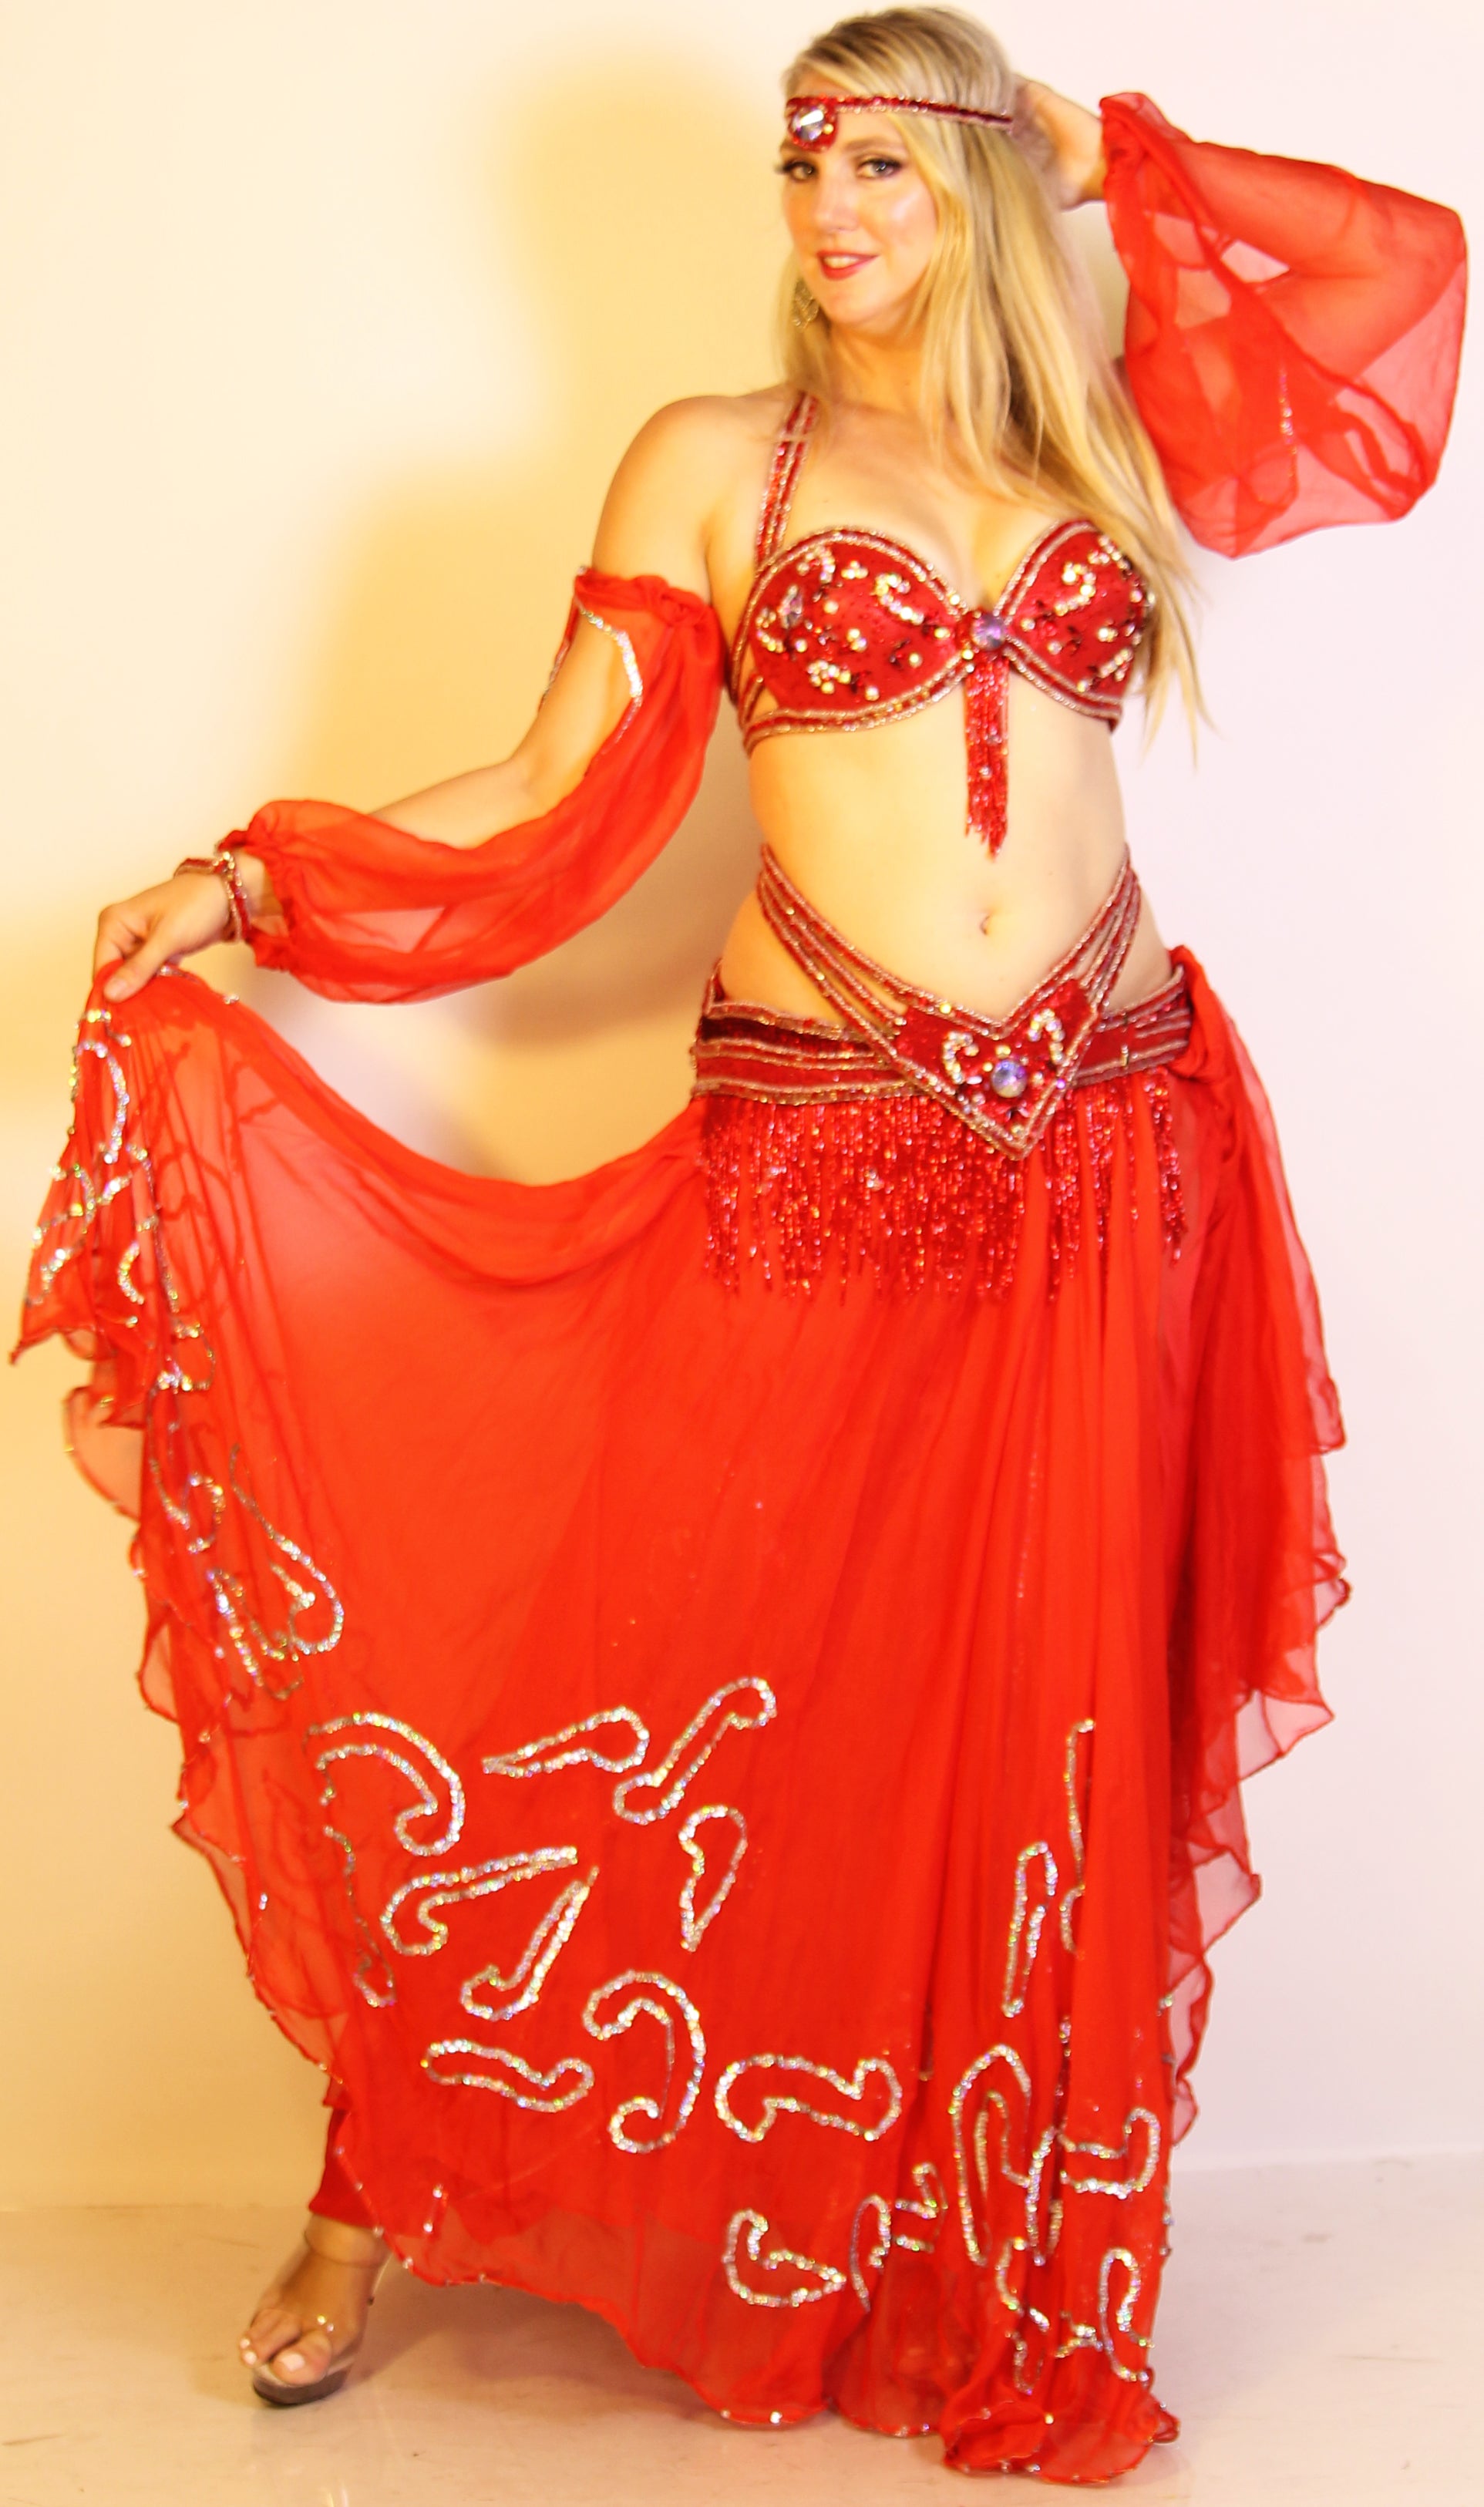 Gold Egyptian Coin and Fringe Belly Dance Costume